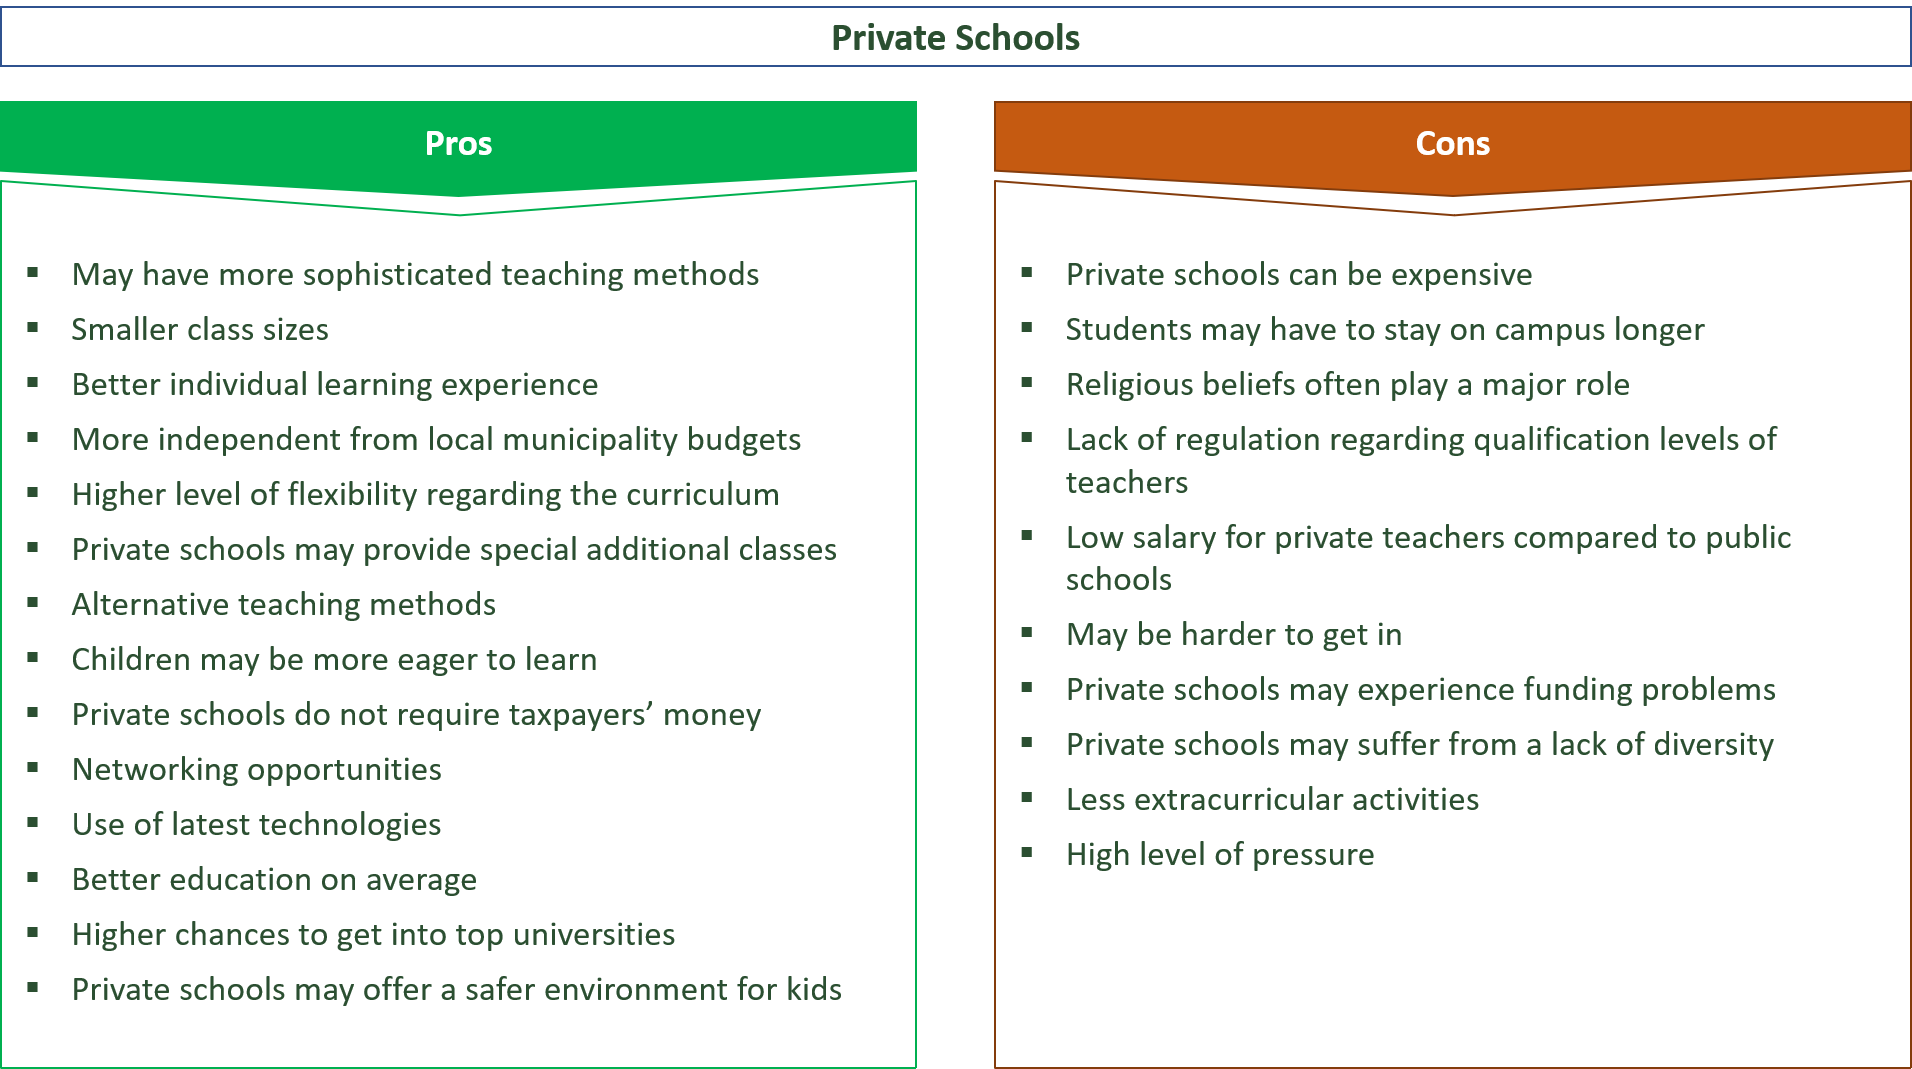 pros and cons of private schools compared to public schools